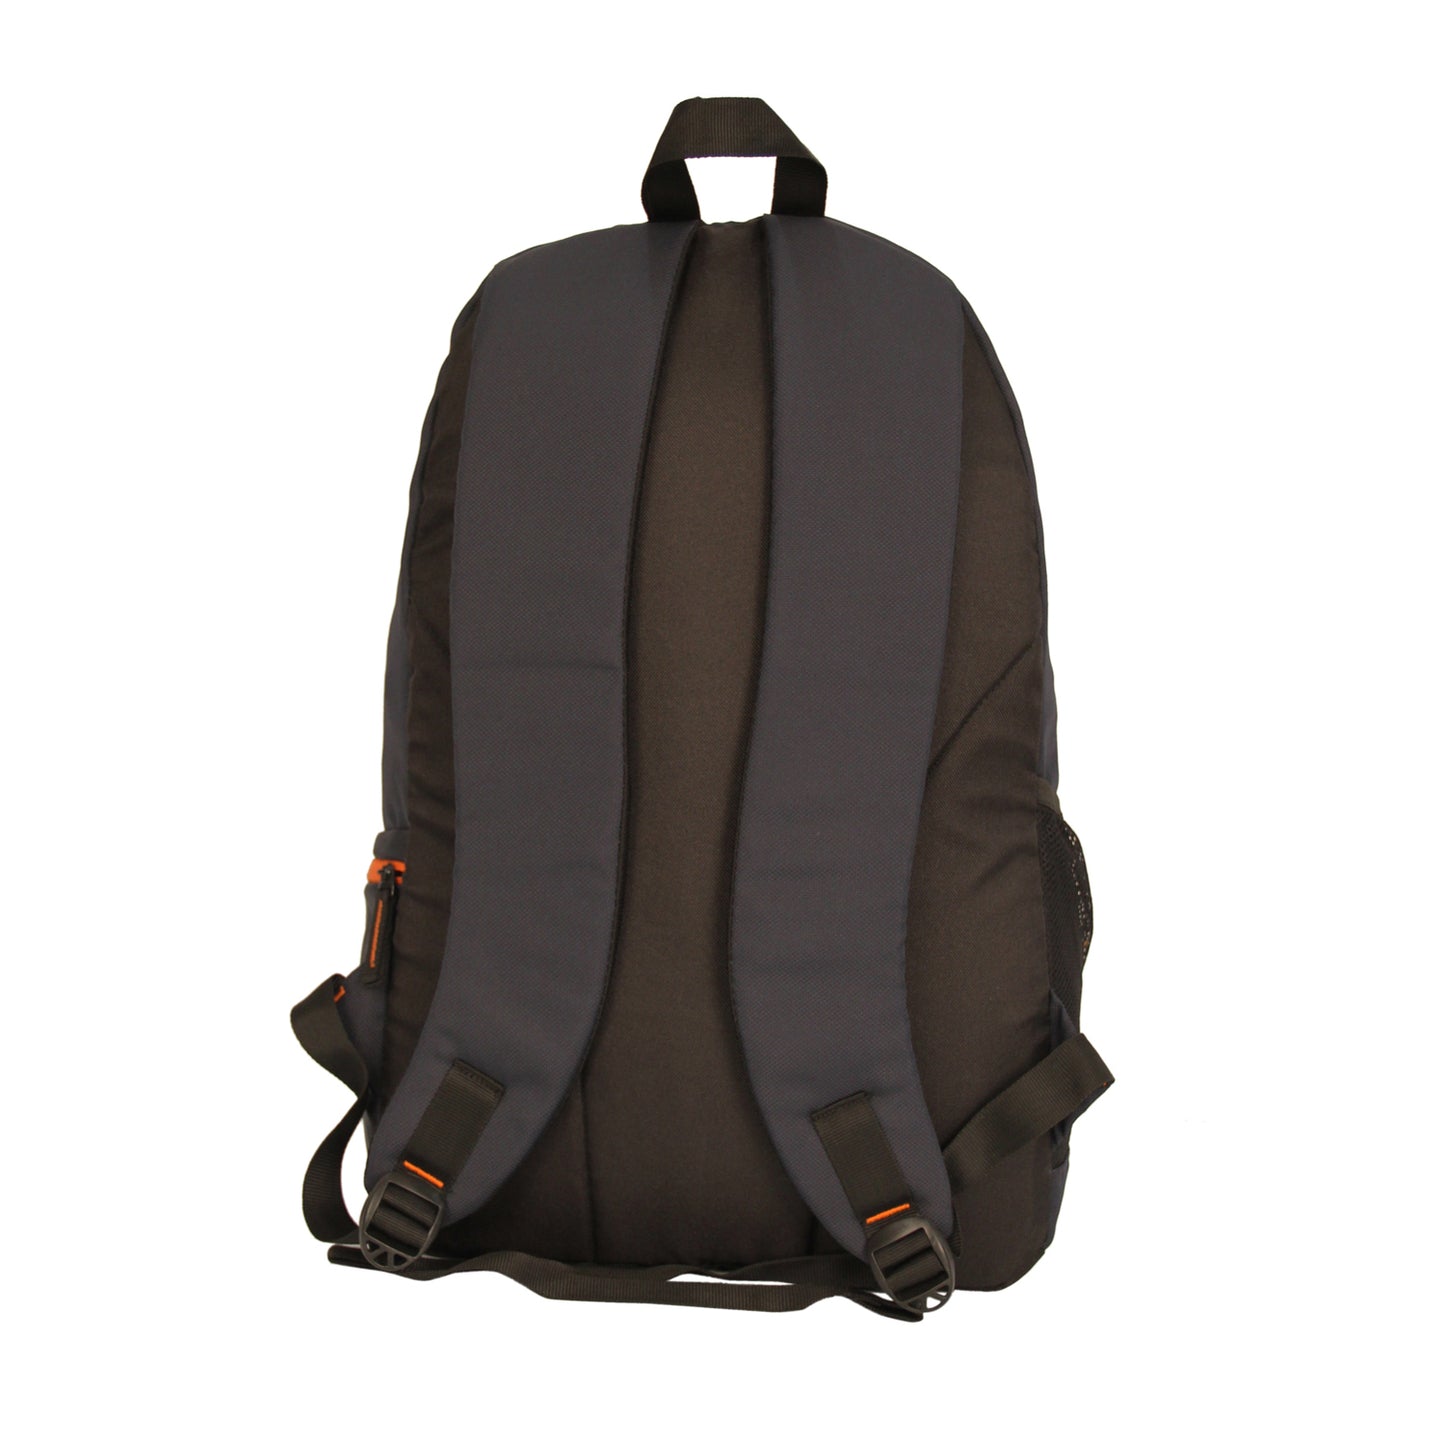 400D Polyester Backpack